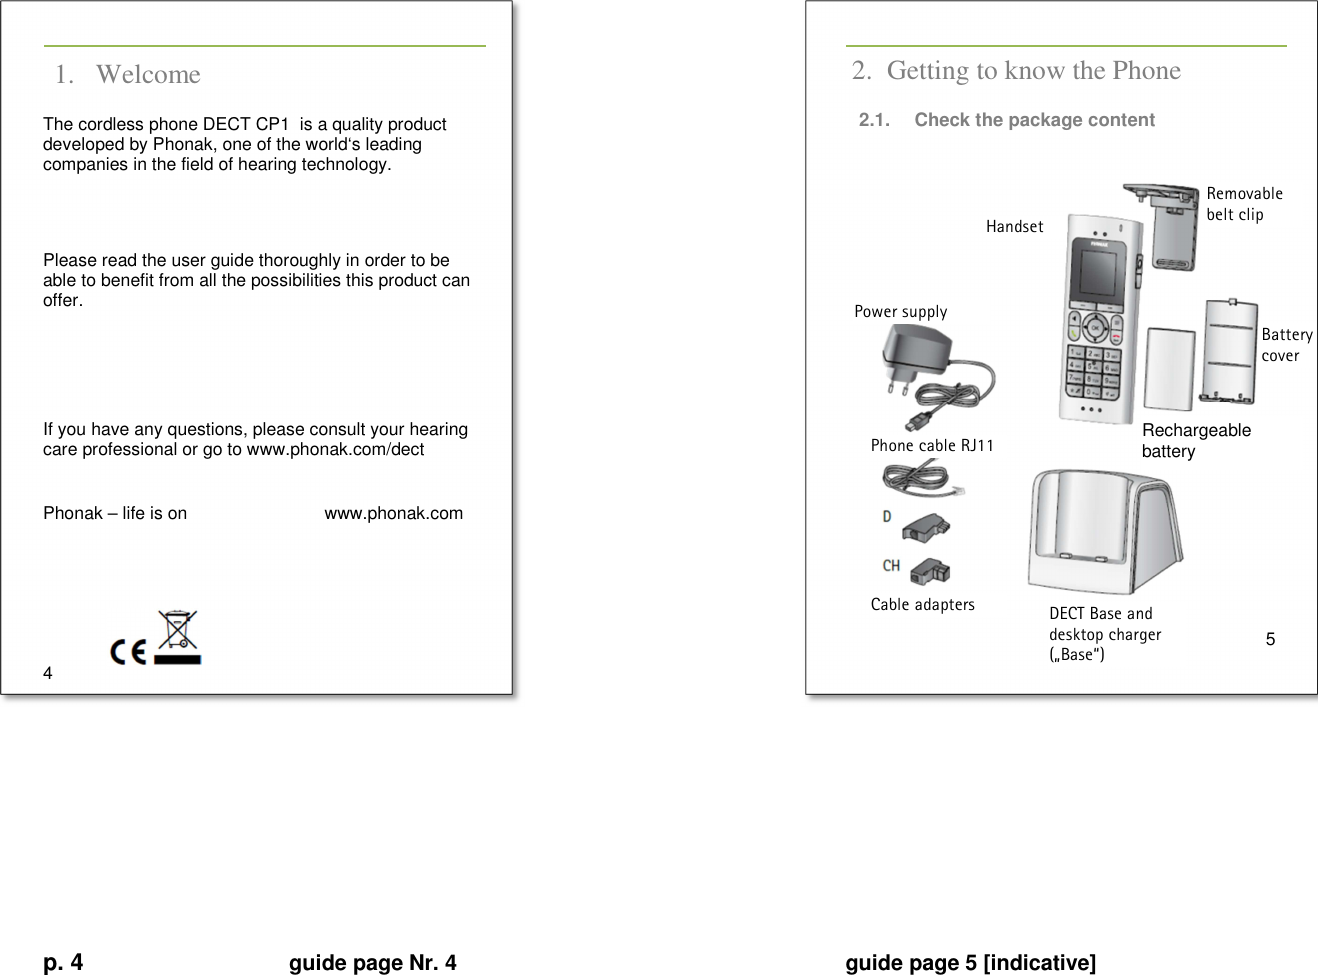 p. 4 guide page Nr. 4  guide page 5 [indicative]       1. Welcome The cordless phone DECT CP1  is a quality product developed by Phonak, one of the world‘s leading companies in the field of hearing technology.   Please read the user guide thoroughly in order to be able to benefit from all the possibilities this product can offer.     If you have any questions, please consult your hearing care professional or go to www.phonak.com/dect  Phonak – life is on   www.phonak.com     4   2. Getting to know the Phone 2.1.  Check the package content                  5         Rechargeable battery Removable belt clip Battery cover Handset DECT Base and desktop charger („Base“) Power supply Phone cable RJ11 Cable adapters 